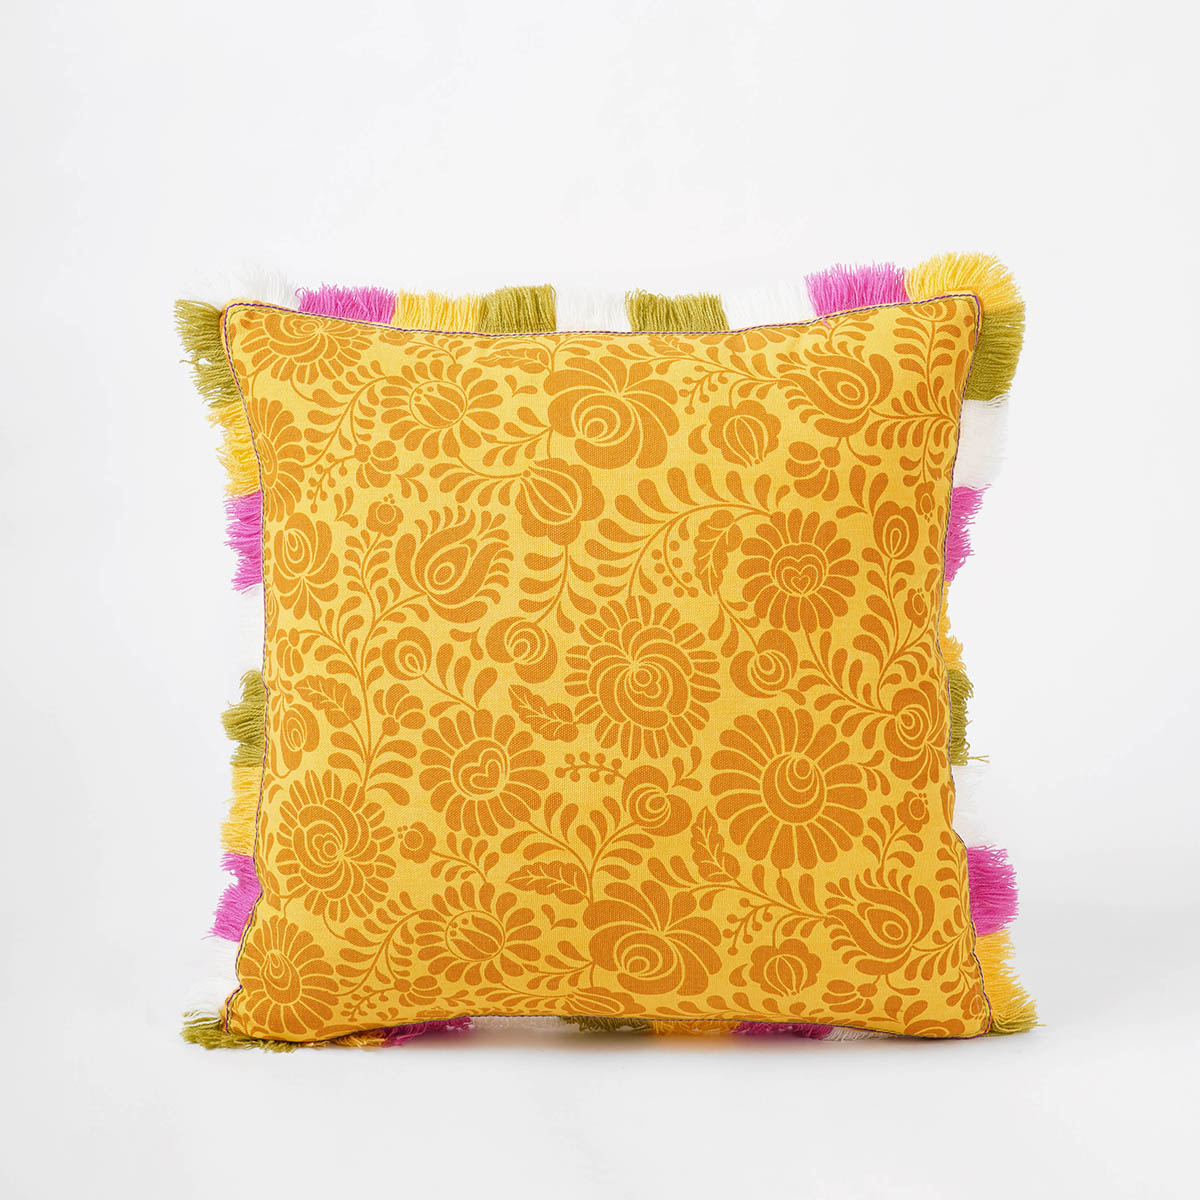 MATYO - Yellow printed cotton Pillow cover with multicolour acrylic fringe, sizes available